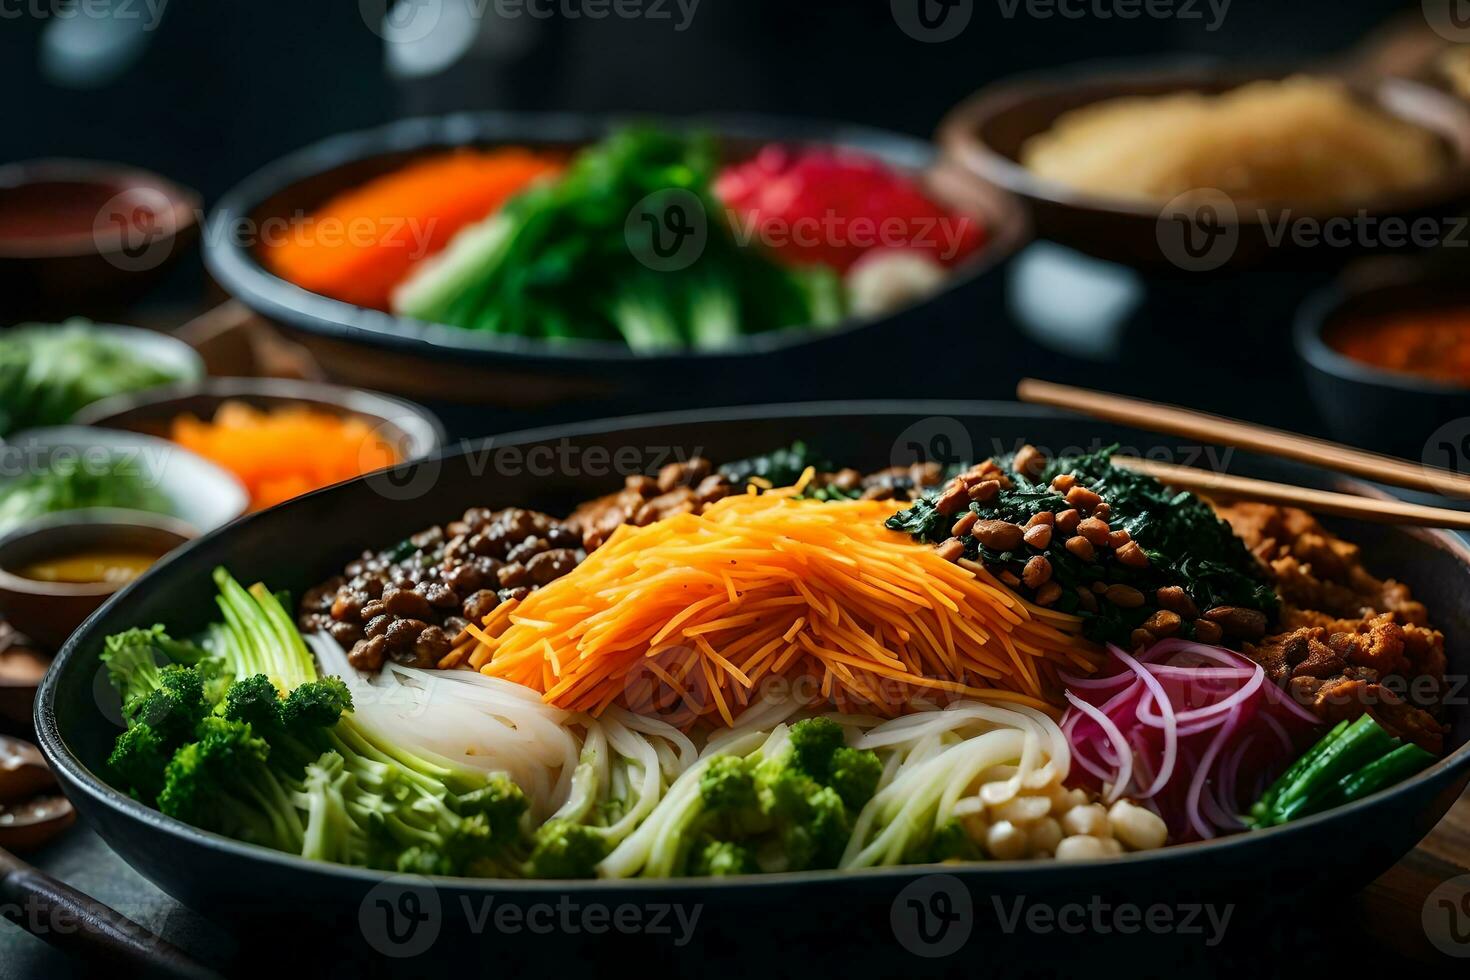 The camera is getting closer to Bibimbap, which is a well known dish from Korea It can be tough to know what's going on behind something AI Generated photo